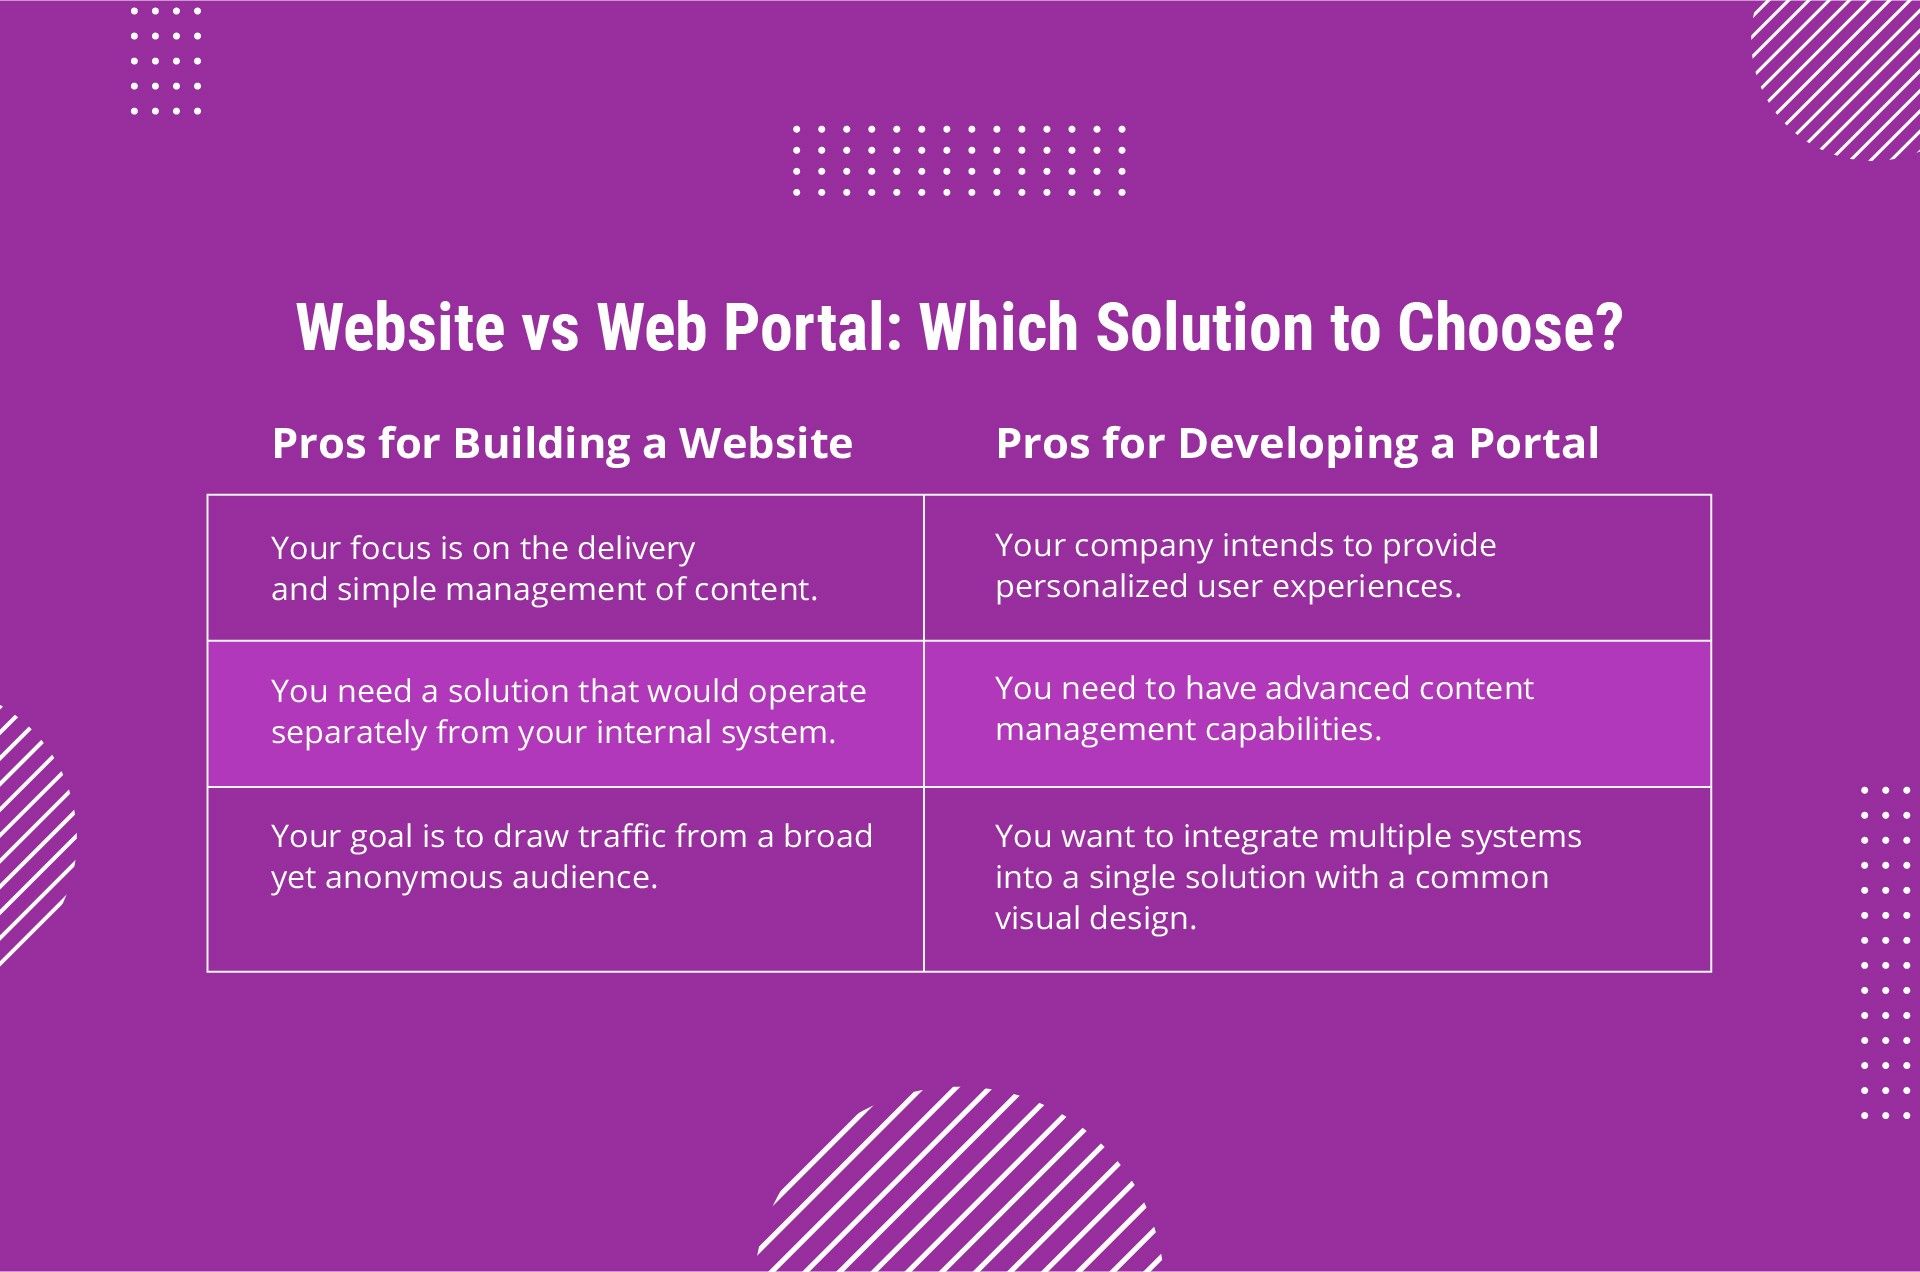 website vs web portal: which solution to choose?